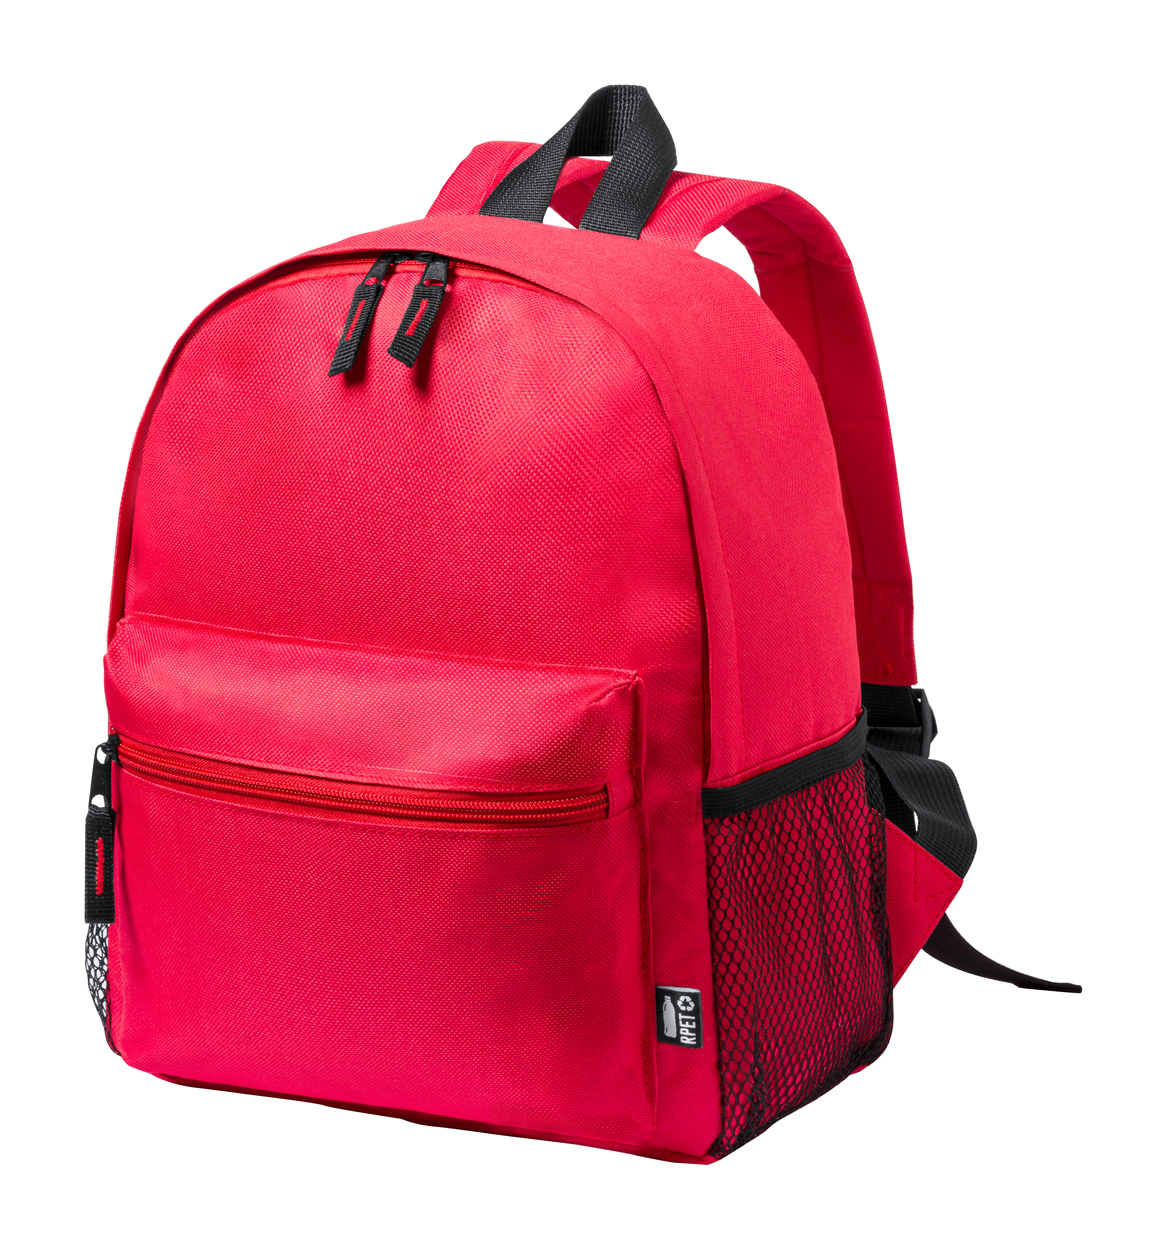 Maggie RPET backpack for children - red